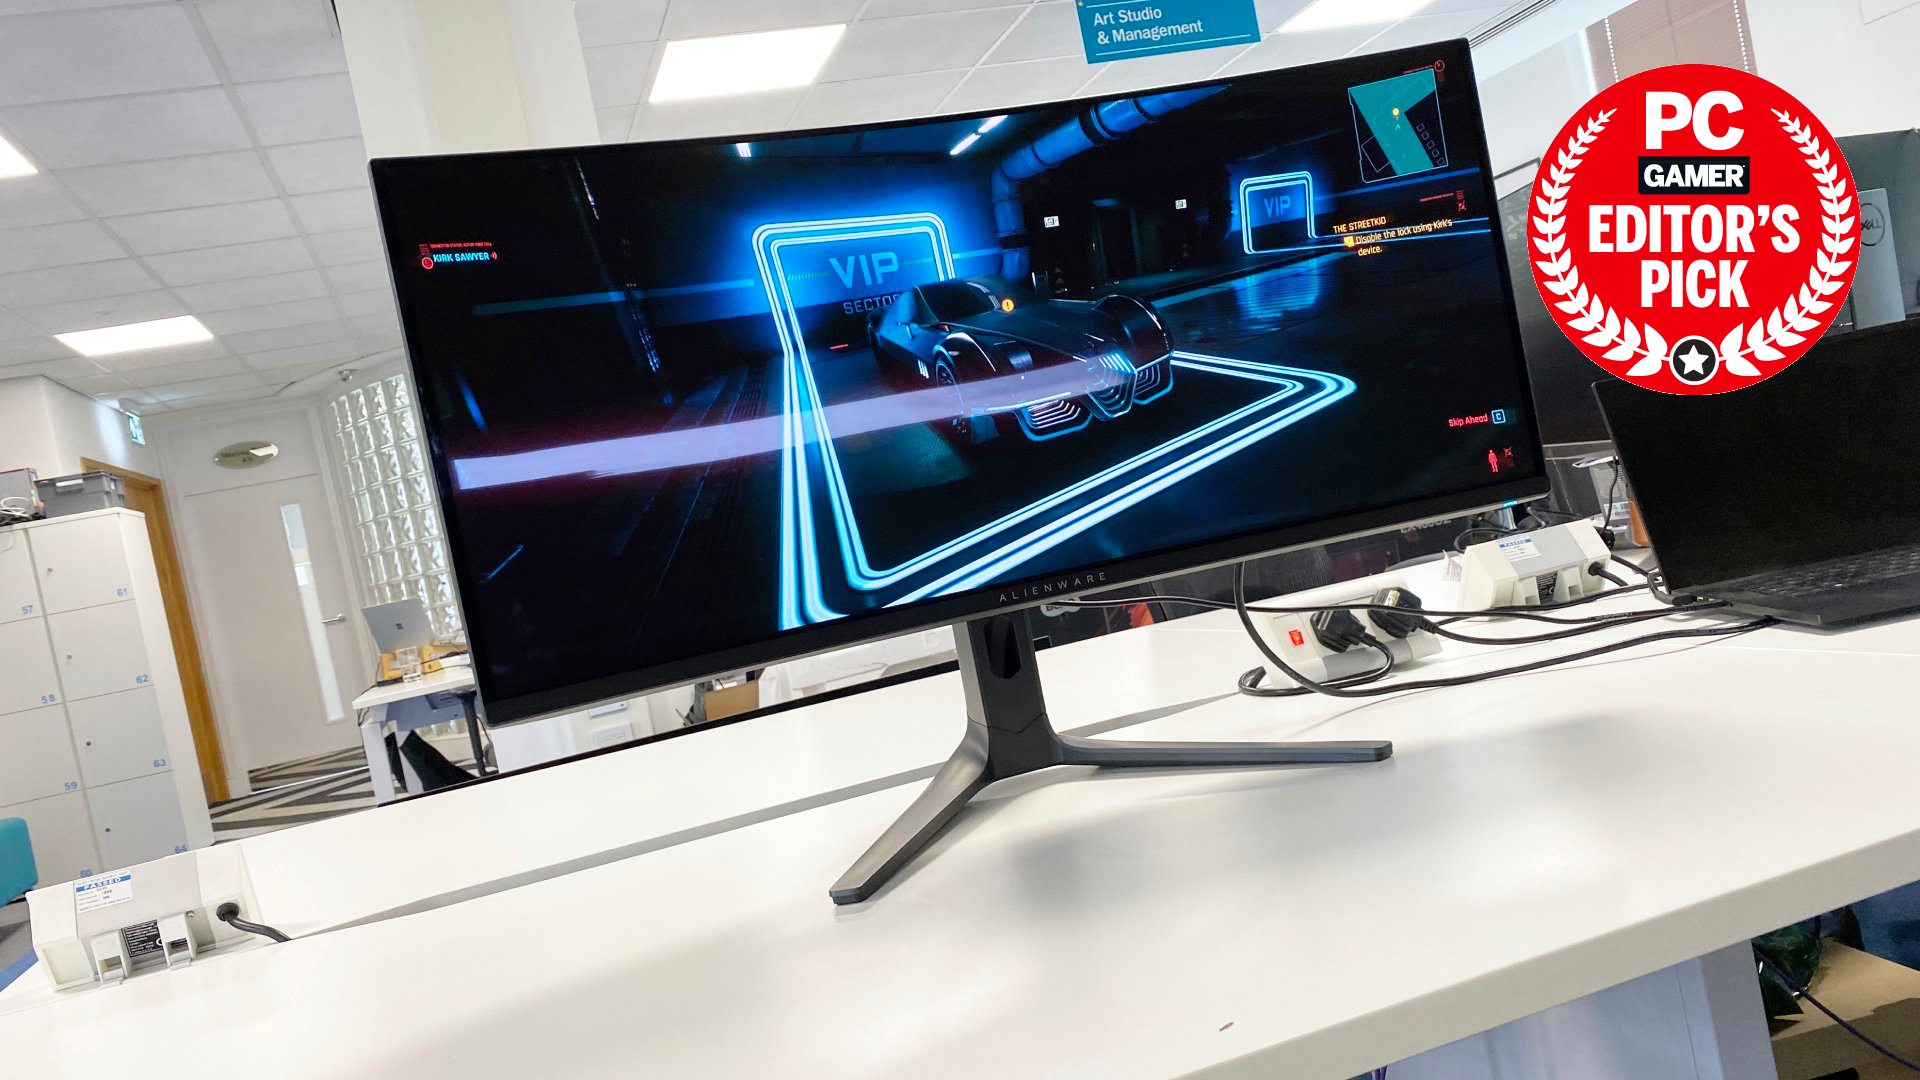 Asus and MSI compete over OLED monitor burn-in warranty lengths – up to 3  years of coverage